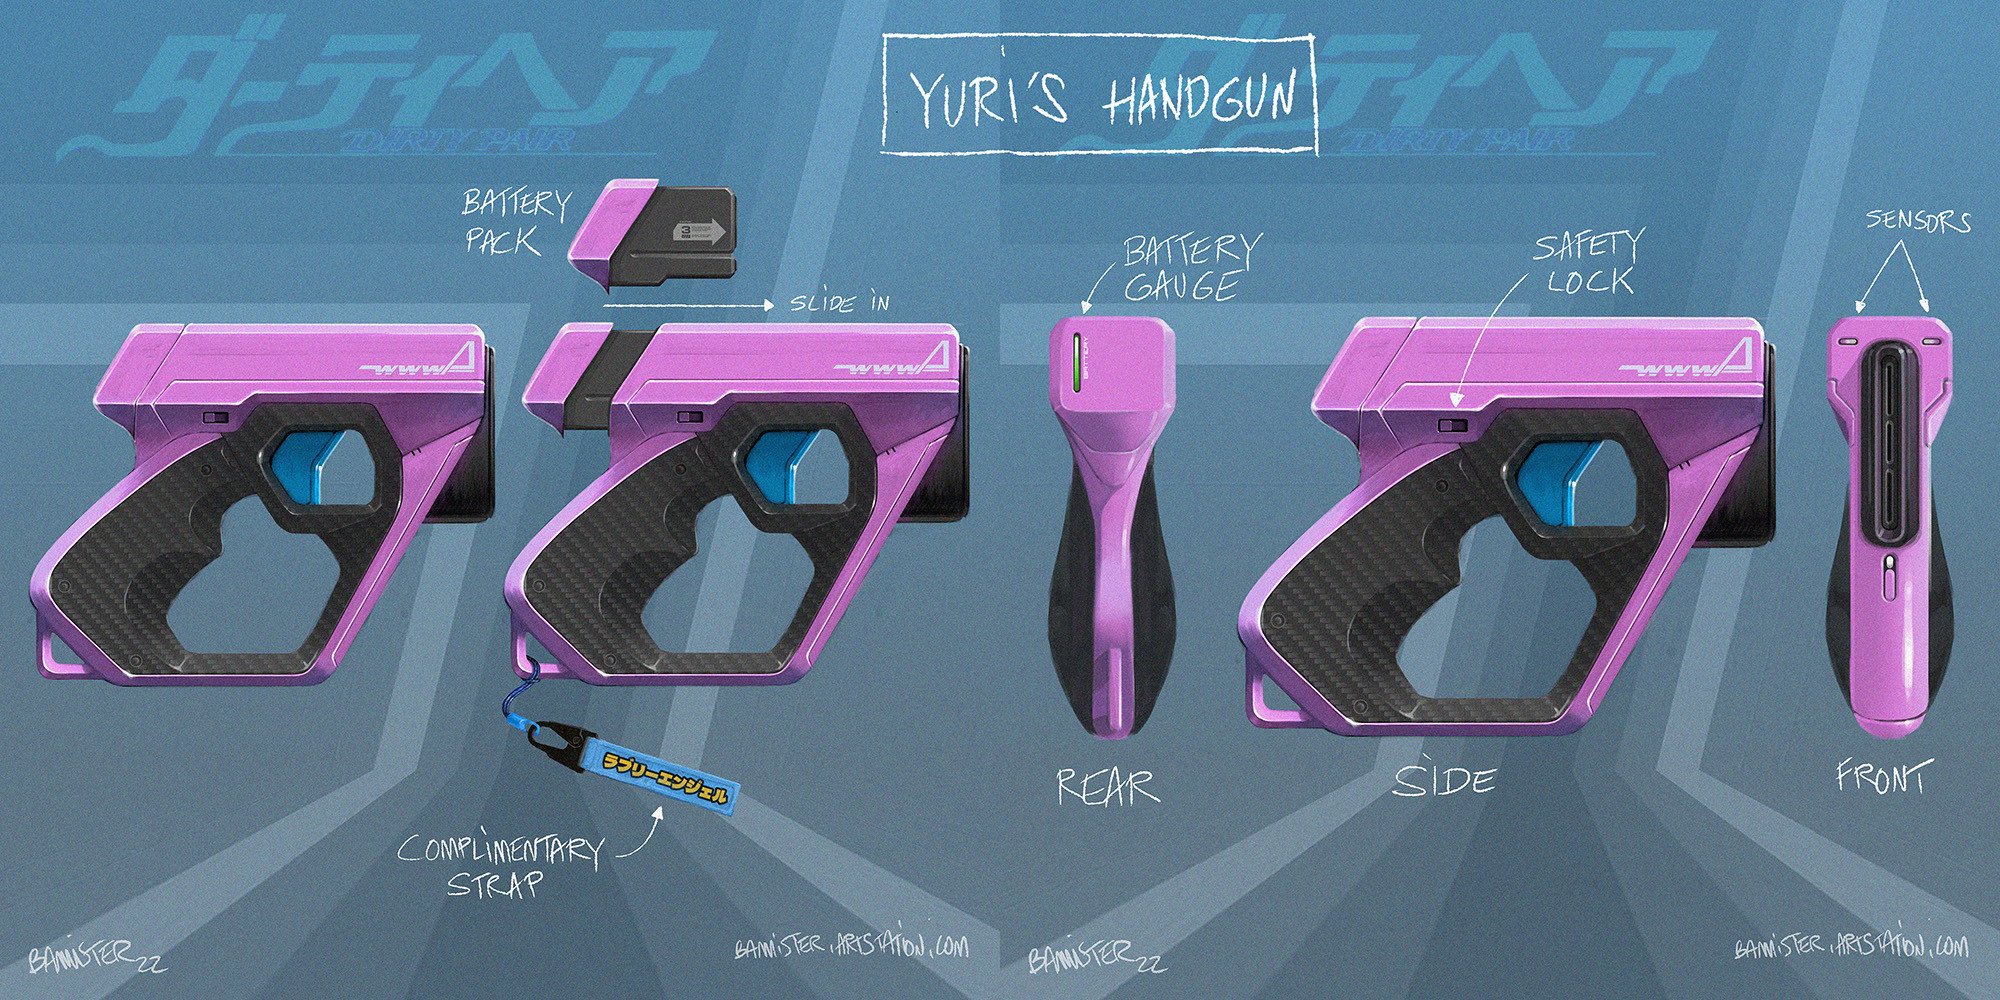 Yuri's compact handgun has been a blast(er) to redesign.
Keeping the original shapes and colors, updating it a bit with some carbon material and tech features. The battery pack system was already in the original design, I didn't invent it.